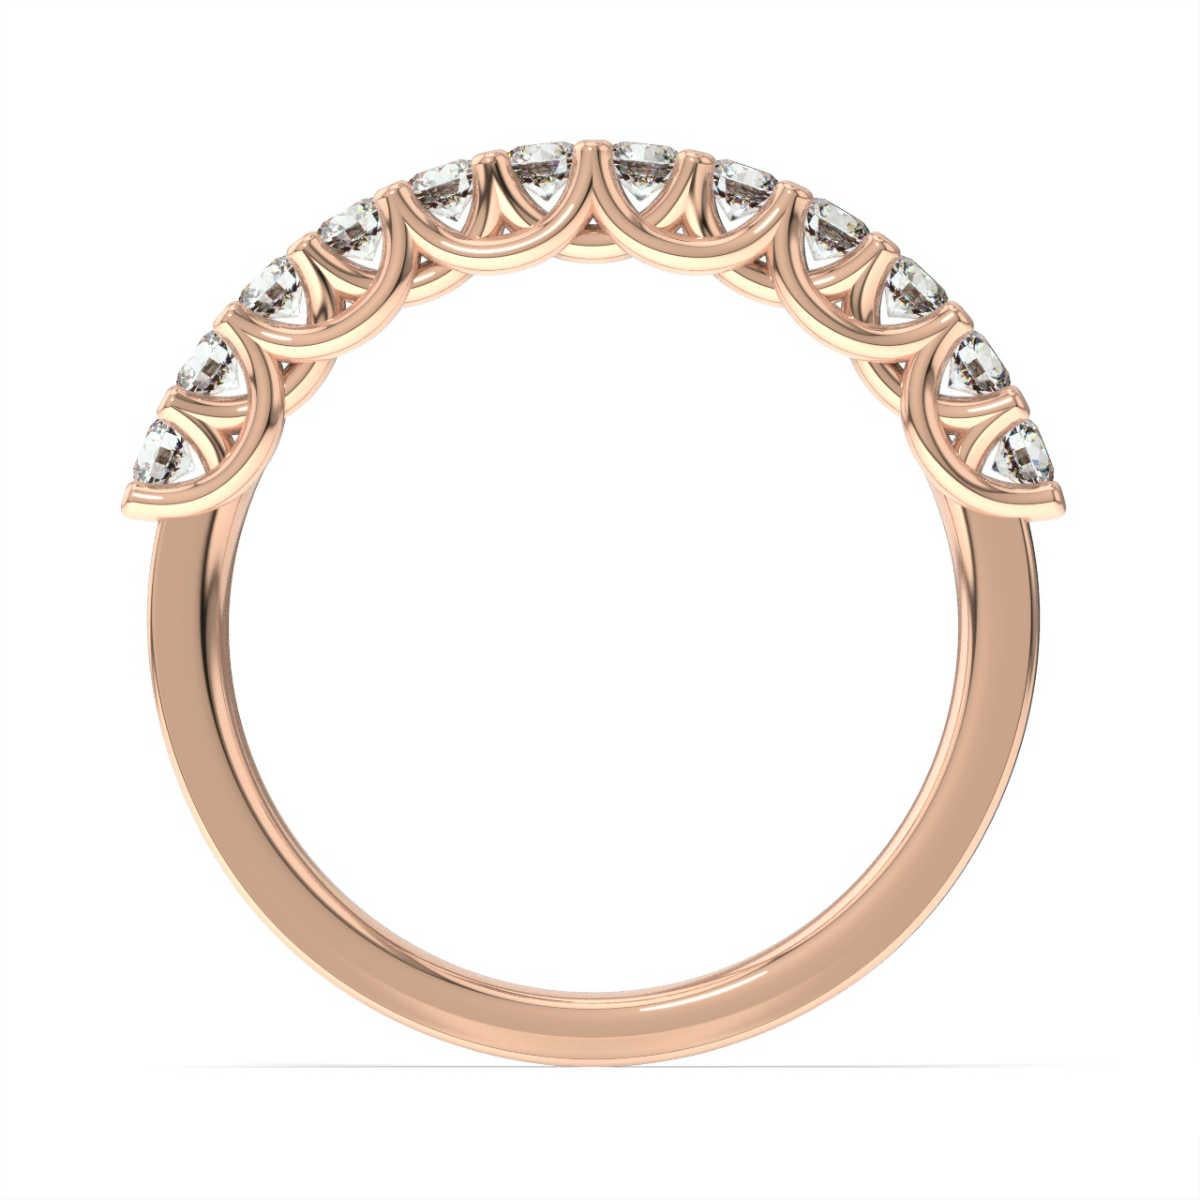 This stunning weave ring features 12 perfectly matched round brilliant diamonds. Experience the difference!

Product details: 

Center Gemstone Color: WHITE
Side Gemstone Type: NATURAL DIAMOND
Side Gemstone Shape: ROUND
Metal: 14K Rose Gold
Metal